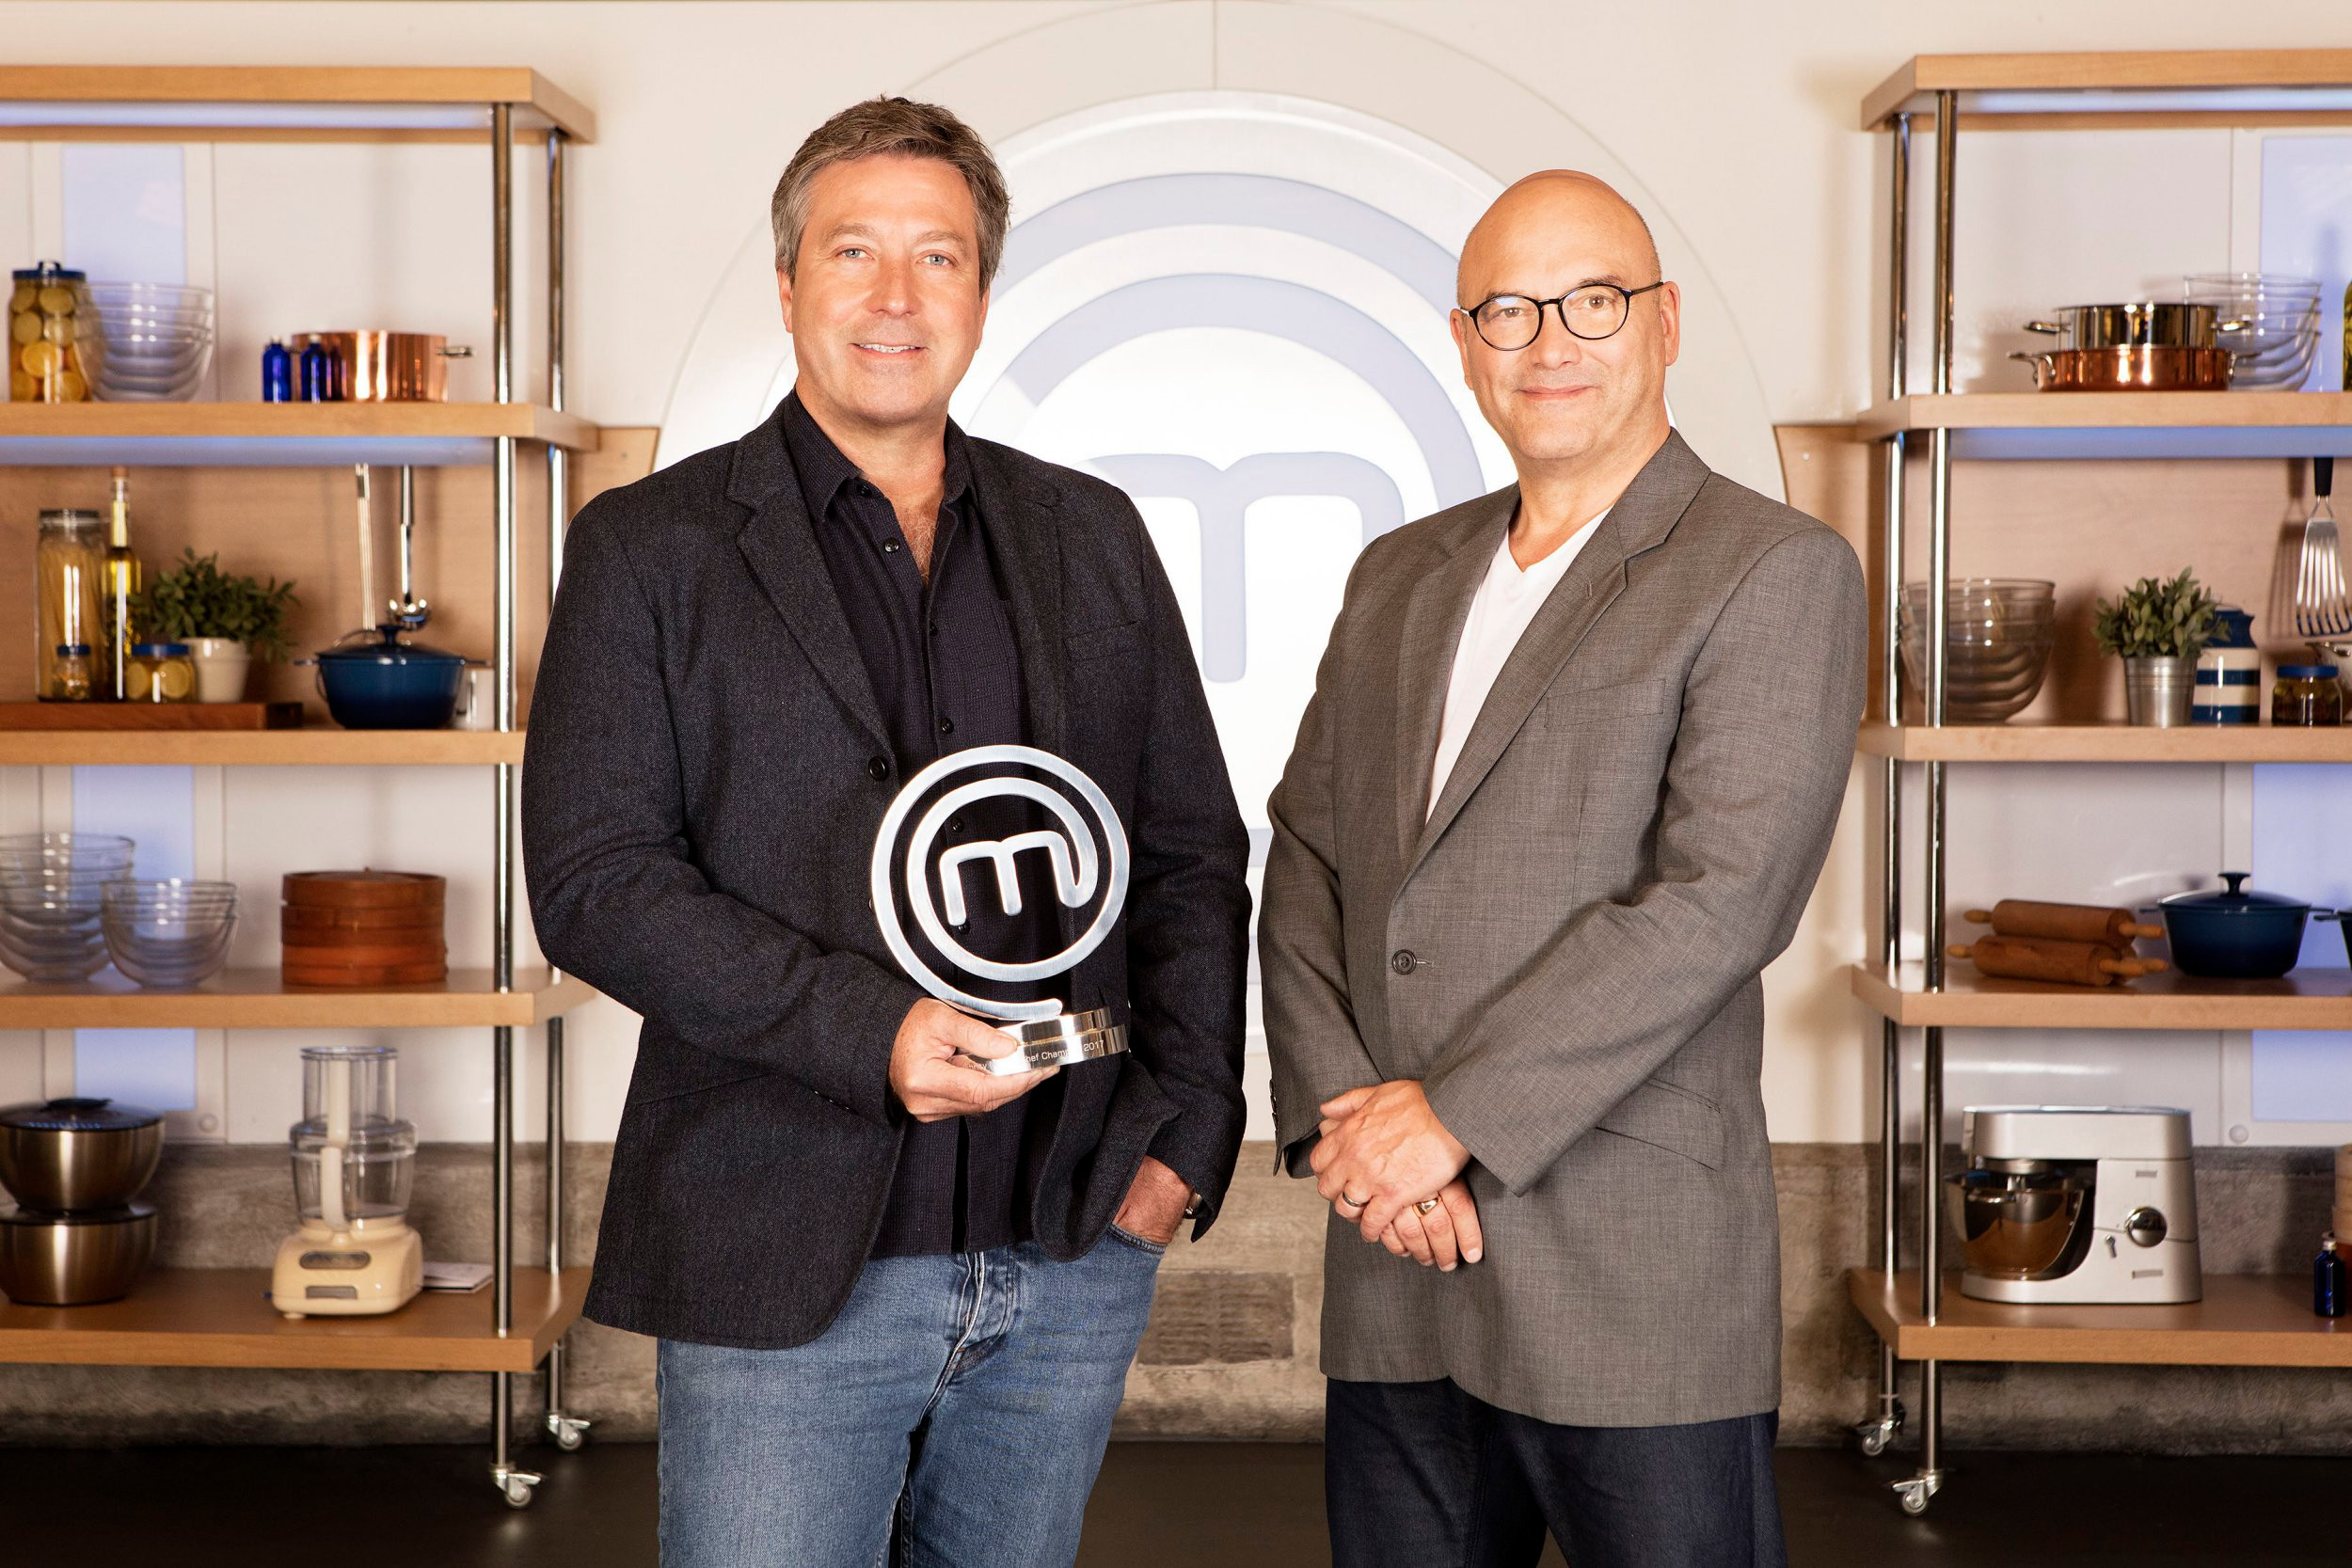 MasterChef’s Gregg Wallace and John Torode ‘not as friendly off screen’ and have ‘never been to each other’s houses’